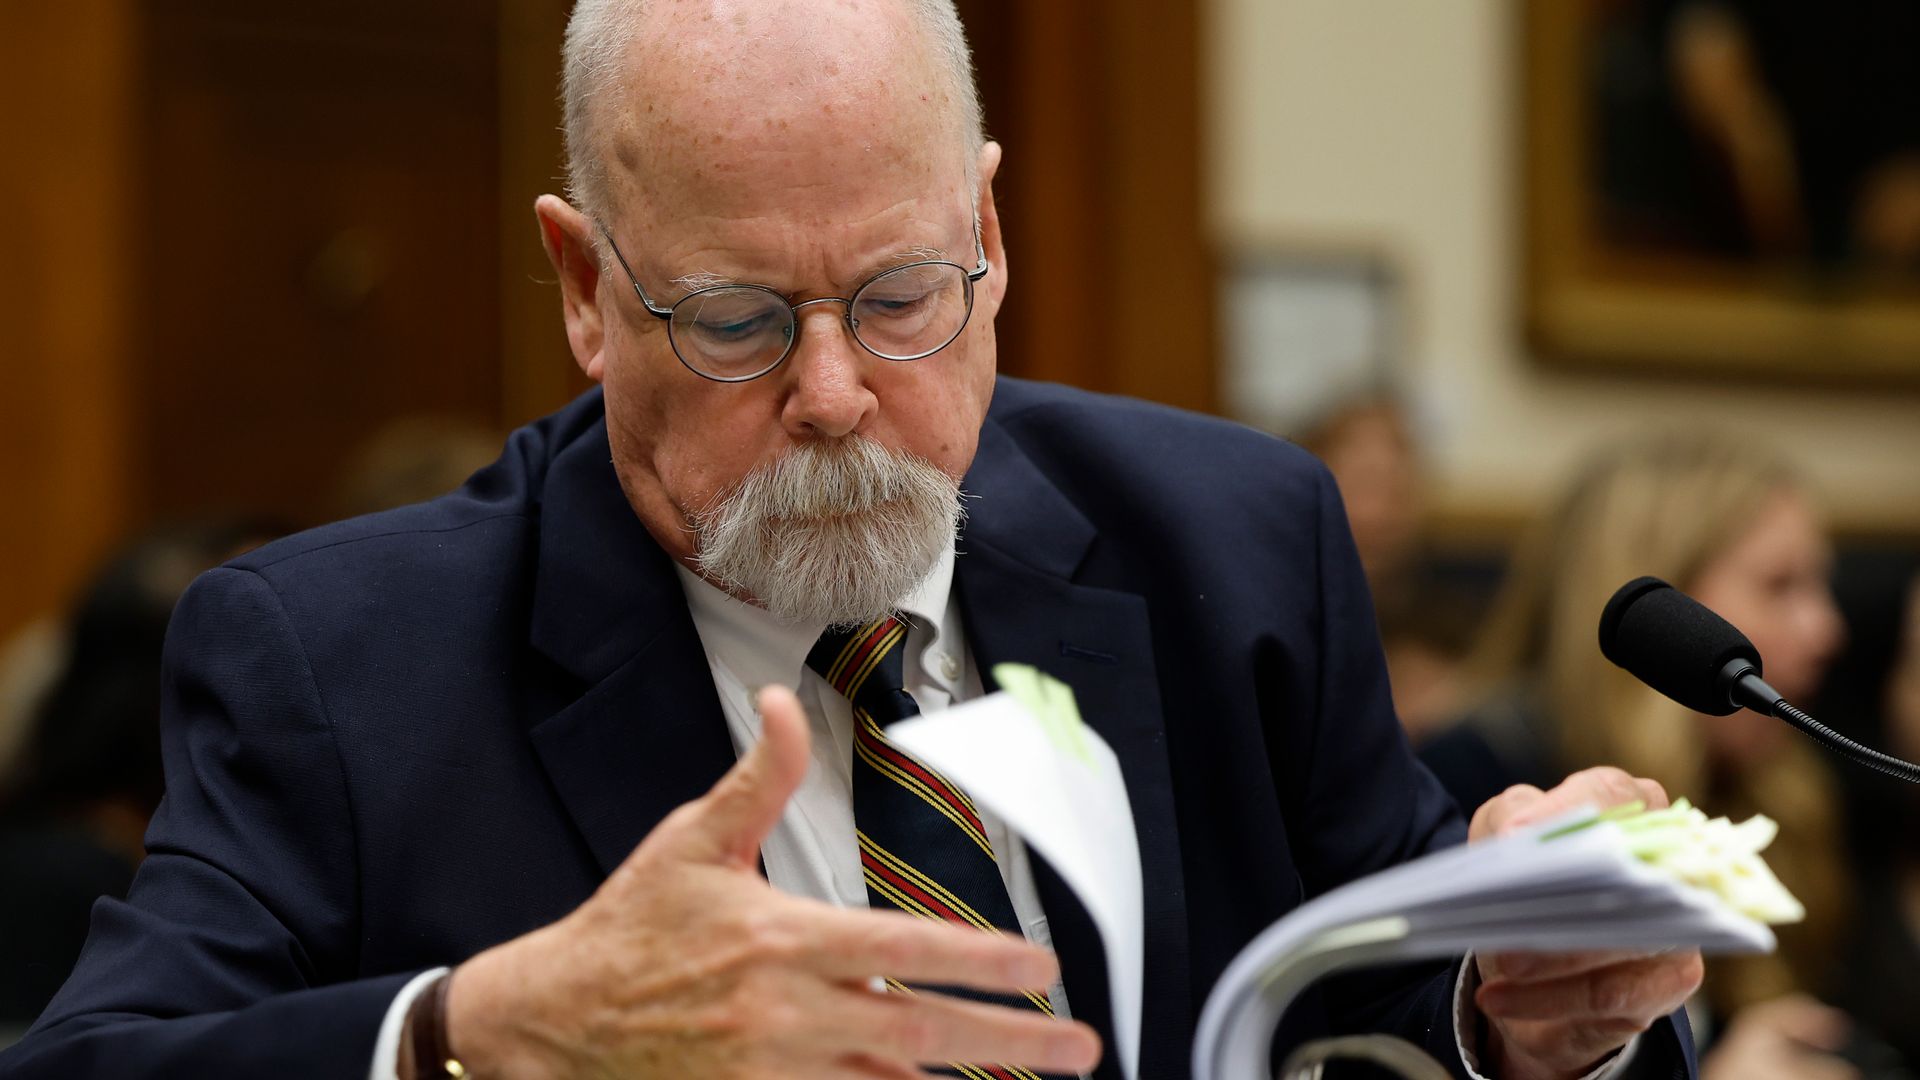 Special counsel John Durham told the House Judiciary Committee that the then CIA director didn't tell agents about key pieces of evidence.